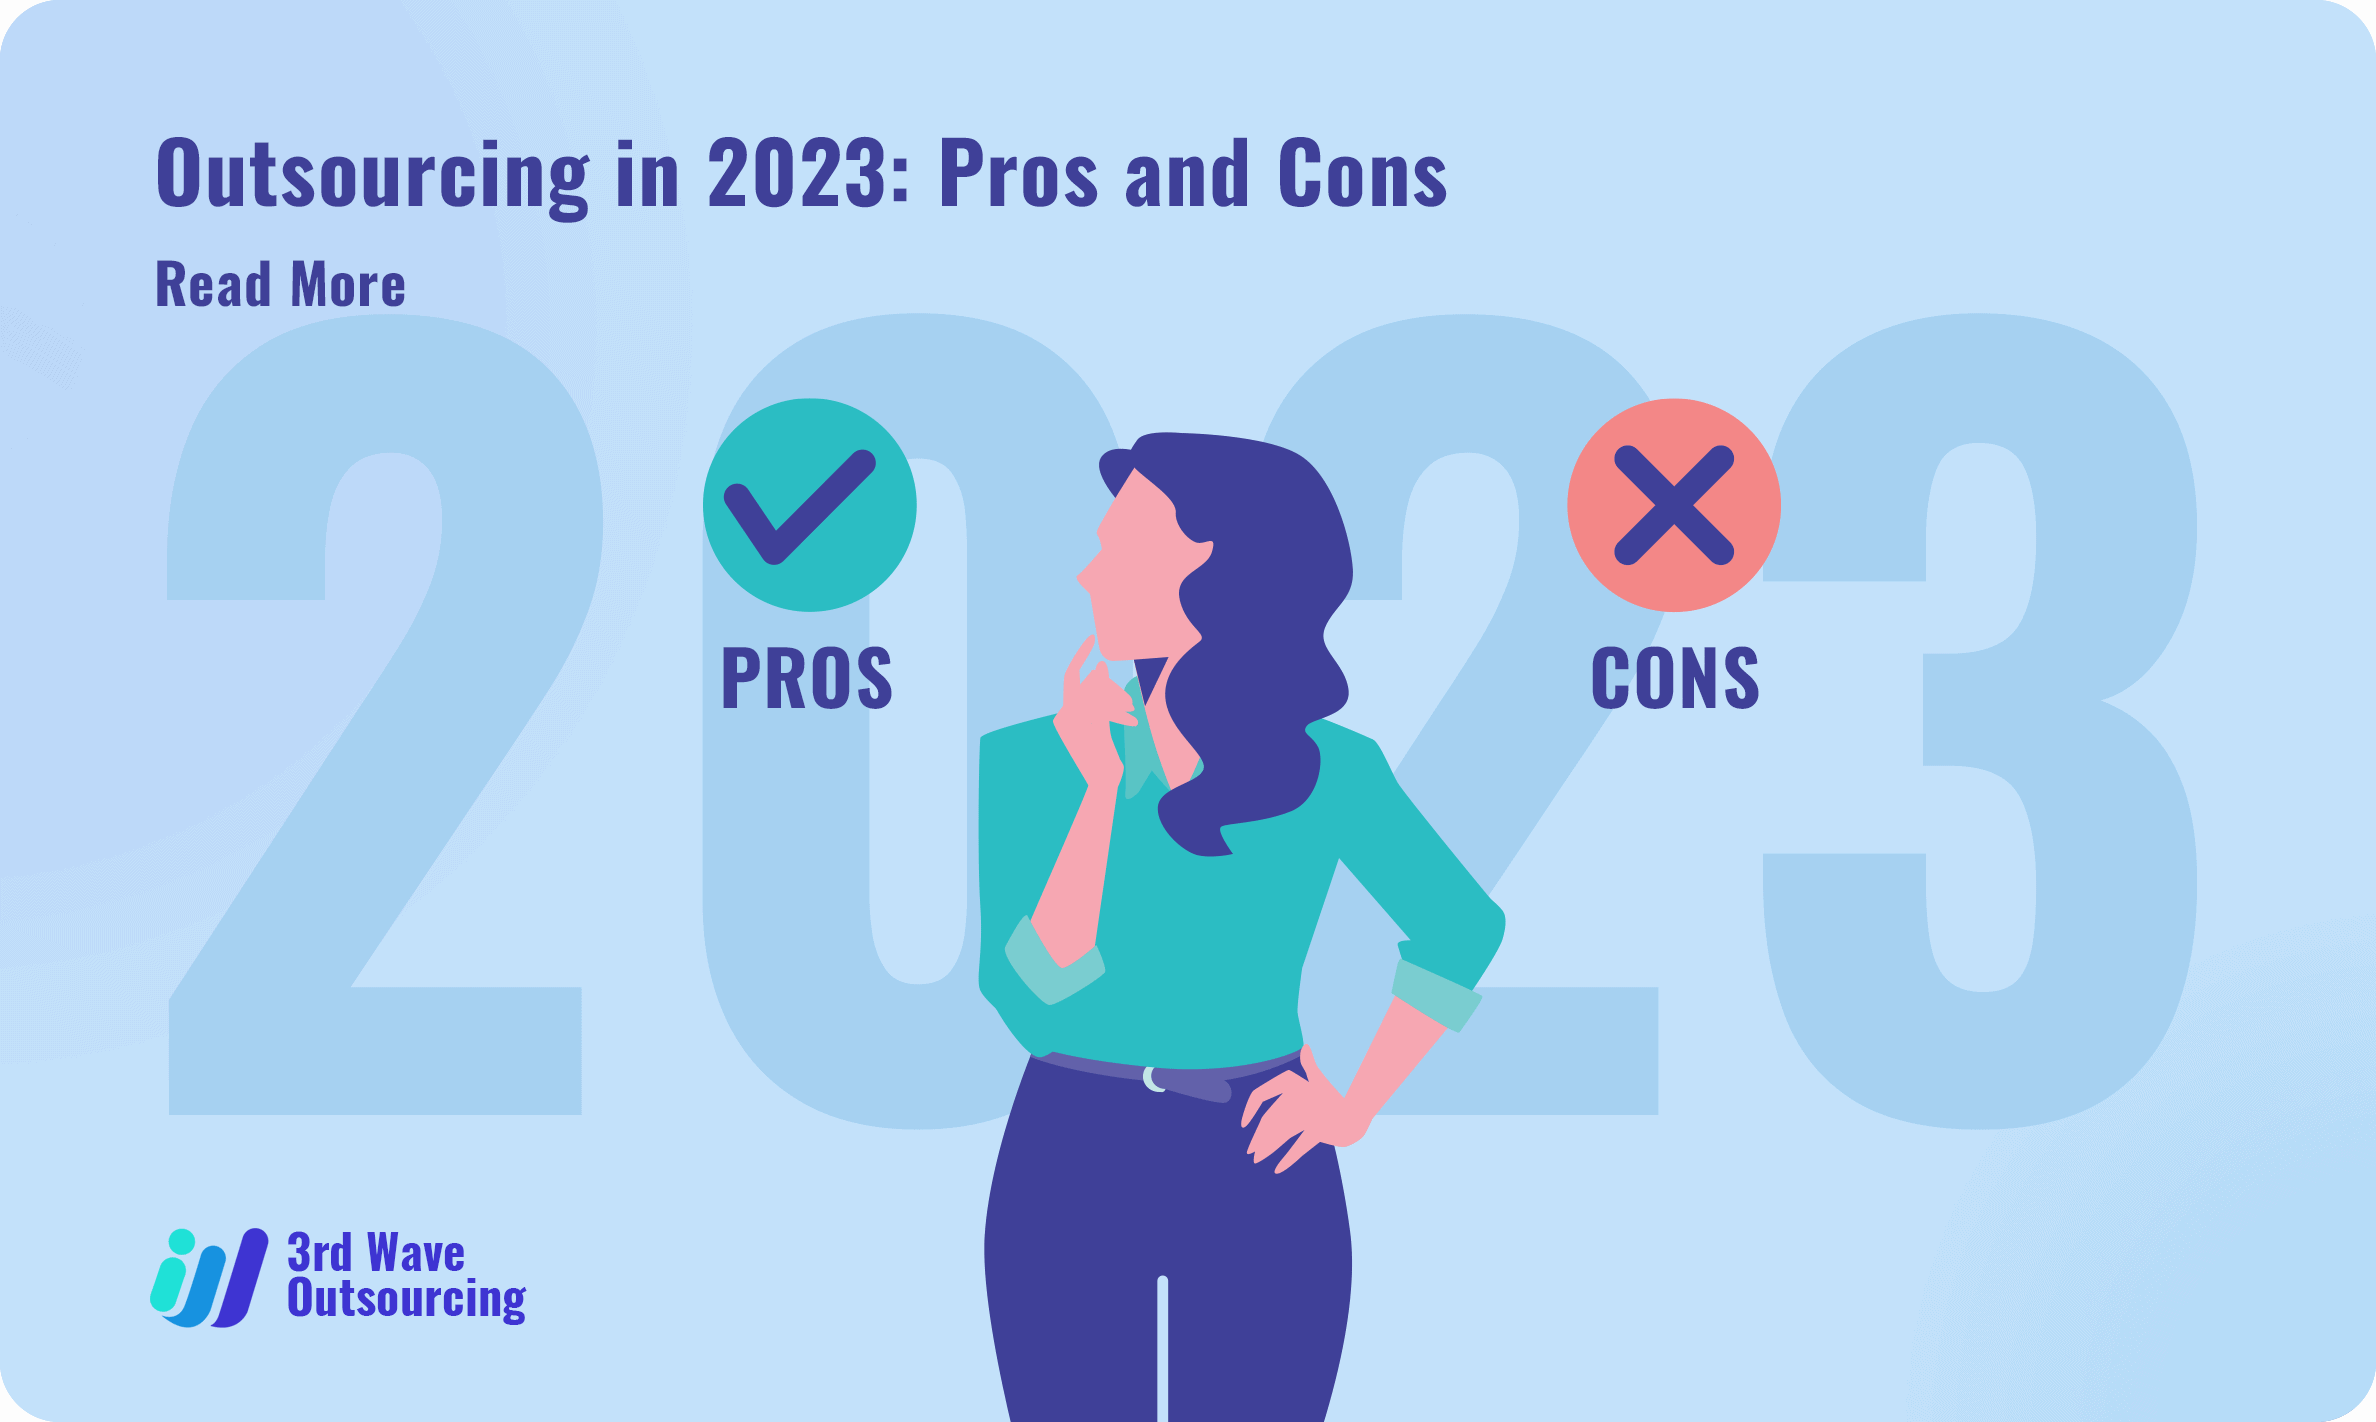 Outsourcing in 2023: Pros and Cons